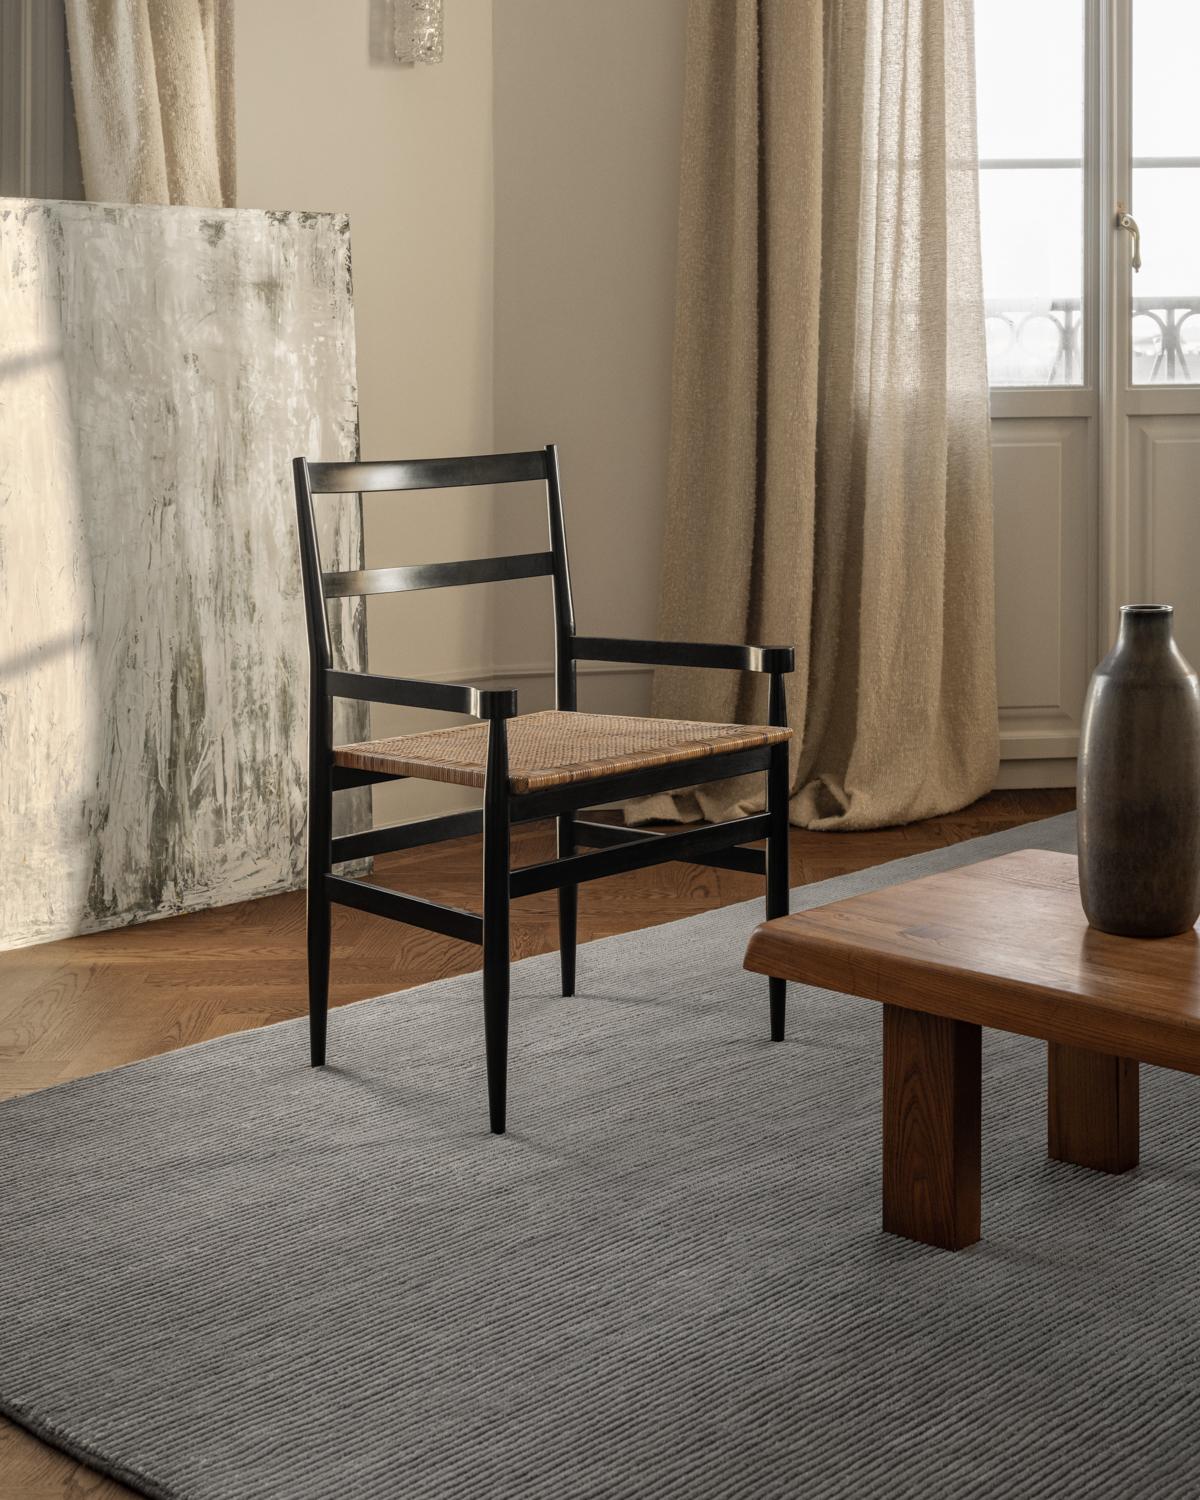 Created for the homes where the most important statement piece is the attention to every detail. The Park Collection is all about the details. At a first glance, a simple design with a subtle expression. At a closer look, the craft of the woven